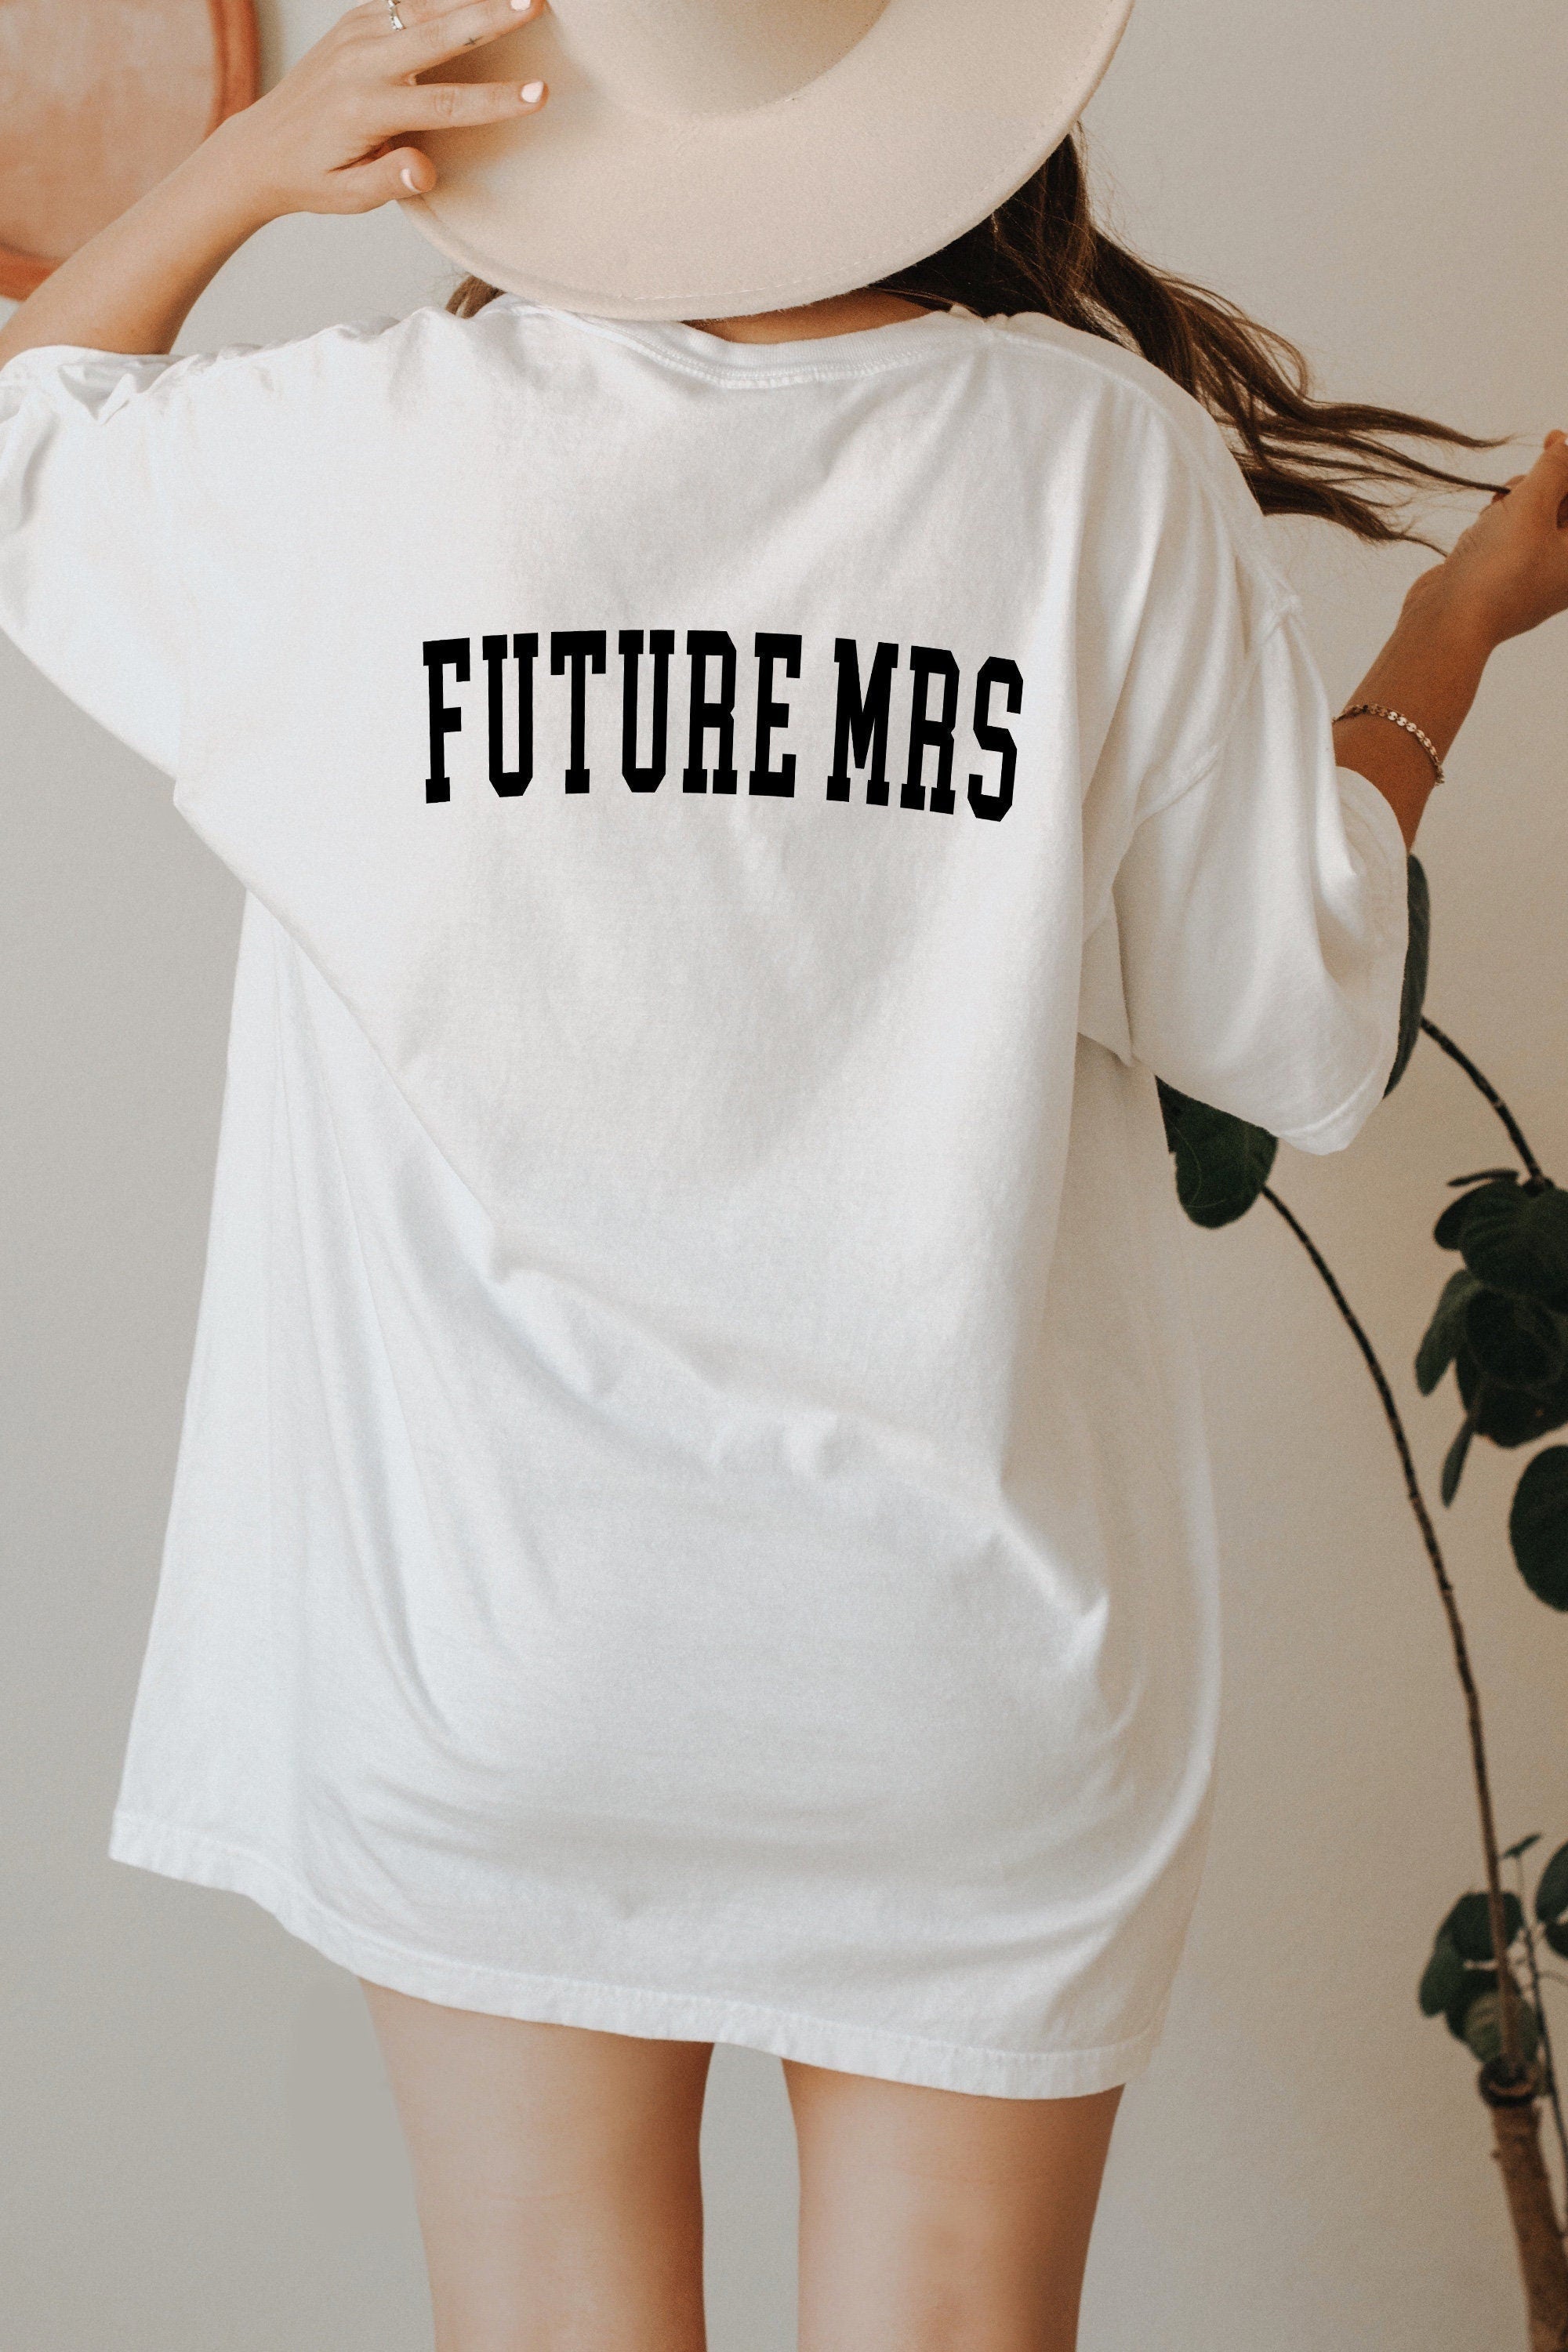 Celebrate Your Journey with a Future Mrs T-Shirt - Perfect Engagement Gift